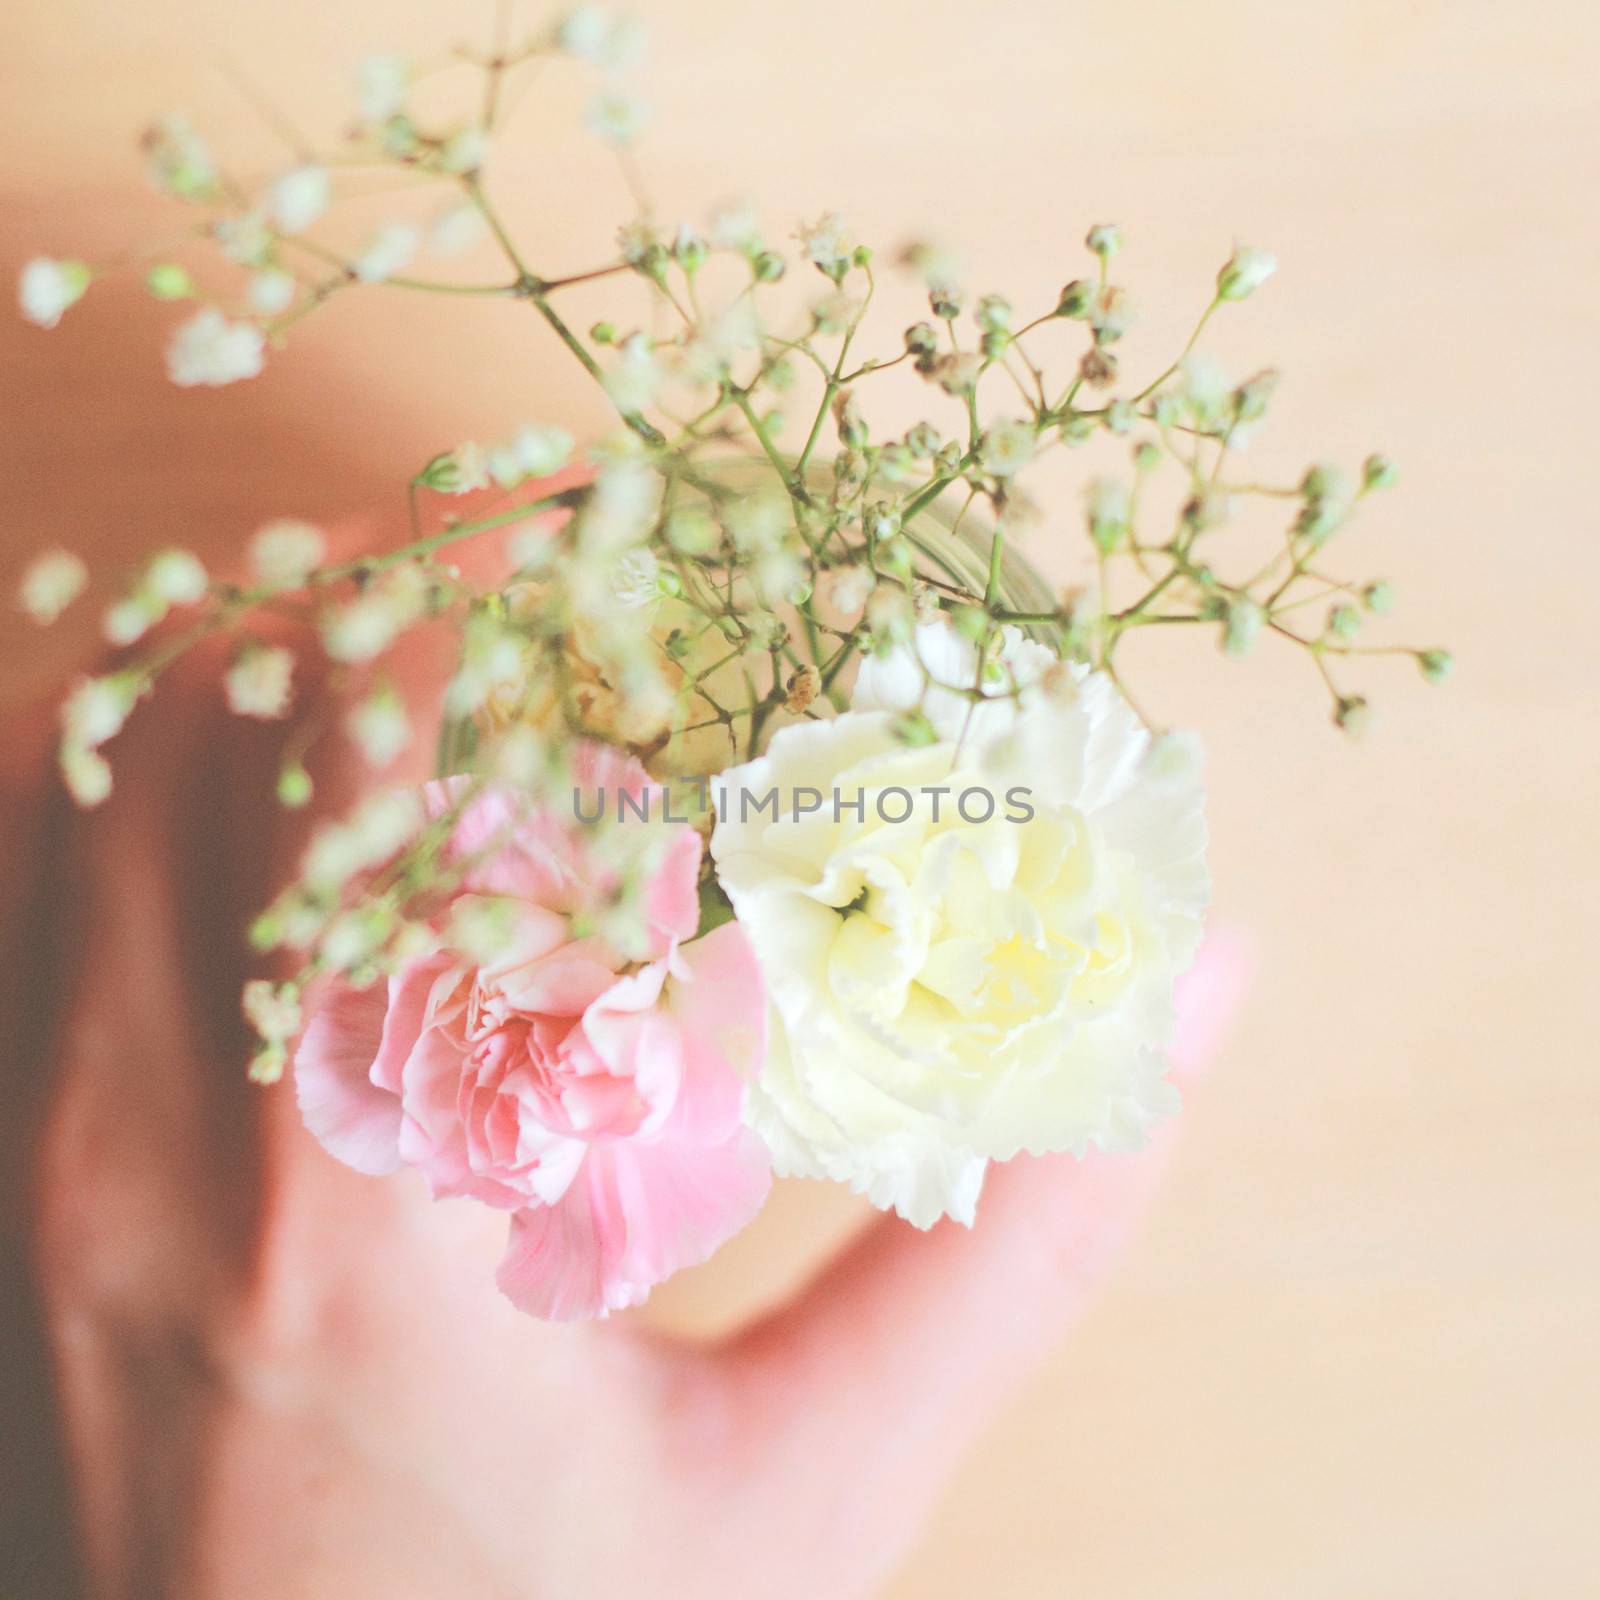 Woman hand holding flower with retro filter effect